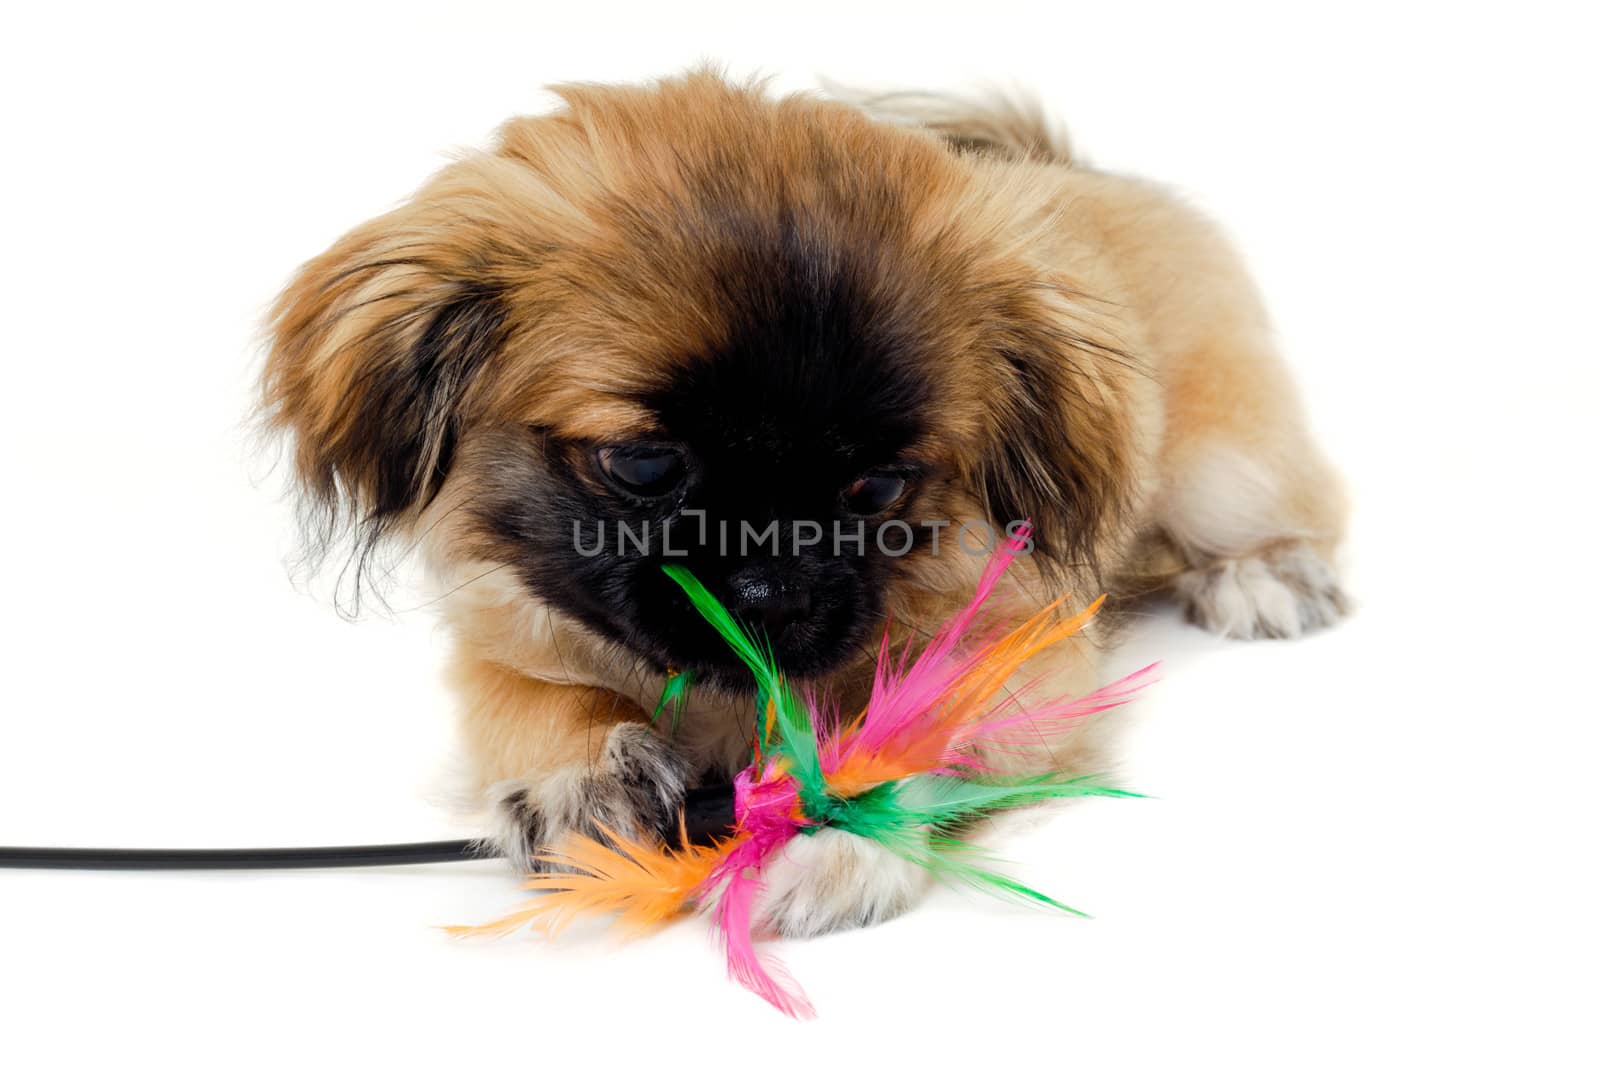 A sweet puppy is playing. Taken on a white background